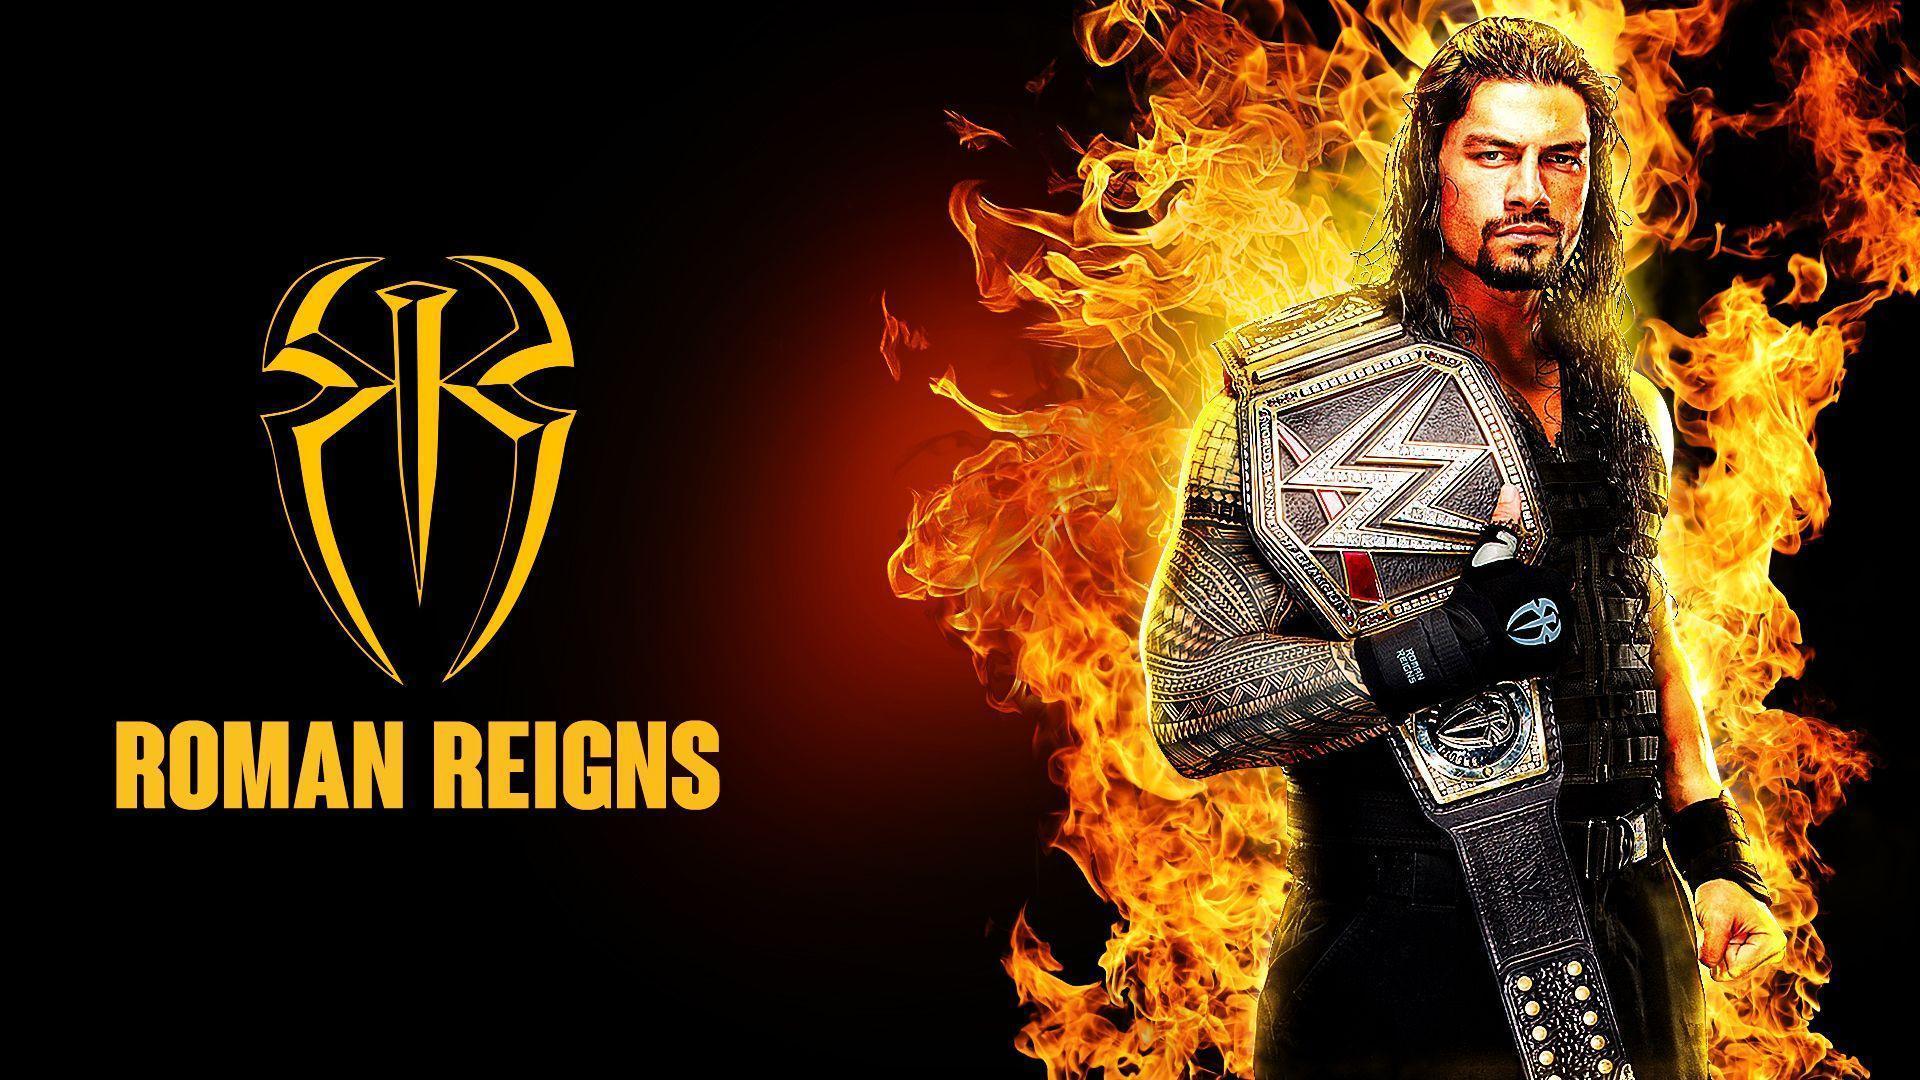 roman reigns hd wallpaper download,movie,fictional character,action film,games,pc game